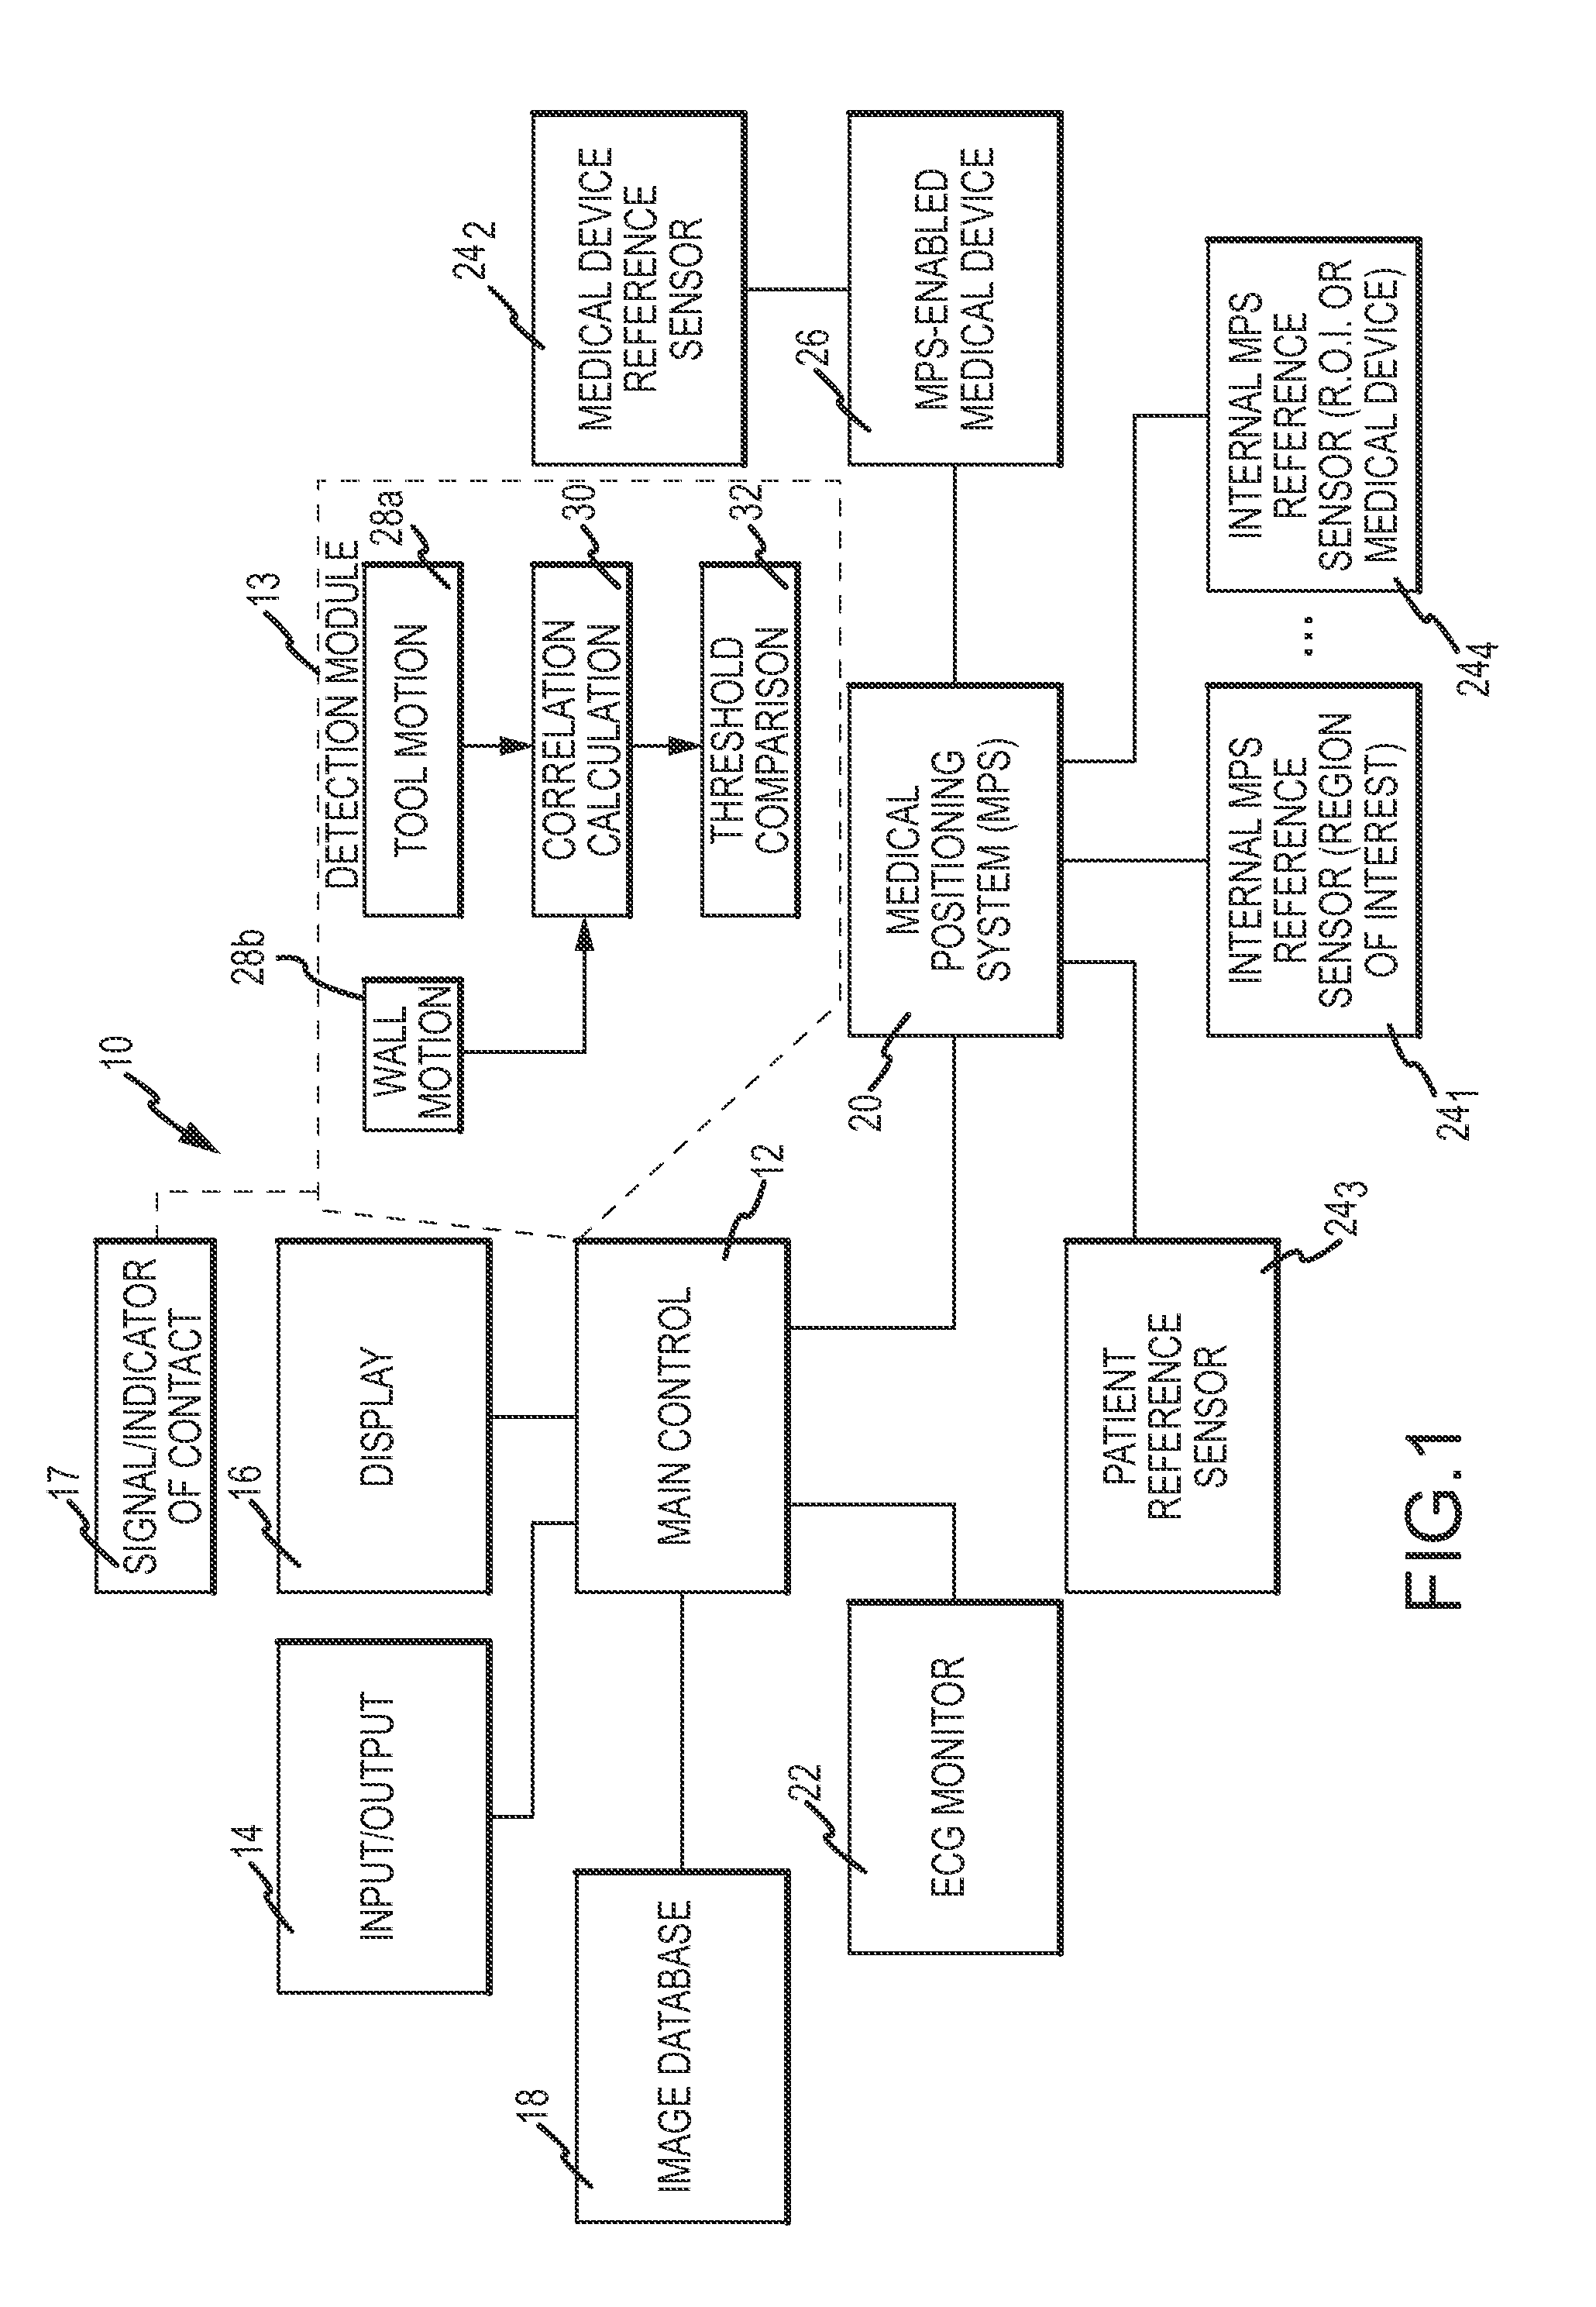 Method for detecting contact with the wall of a region of interest